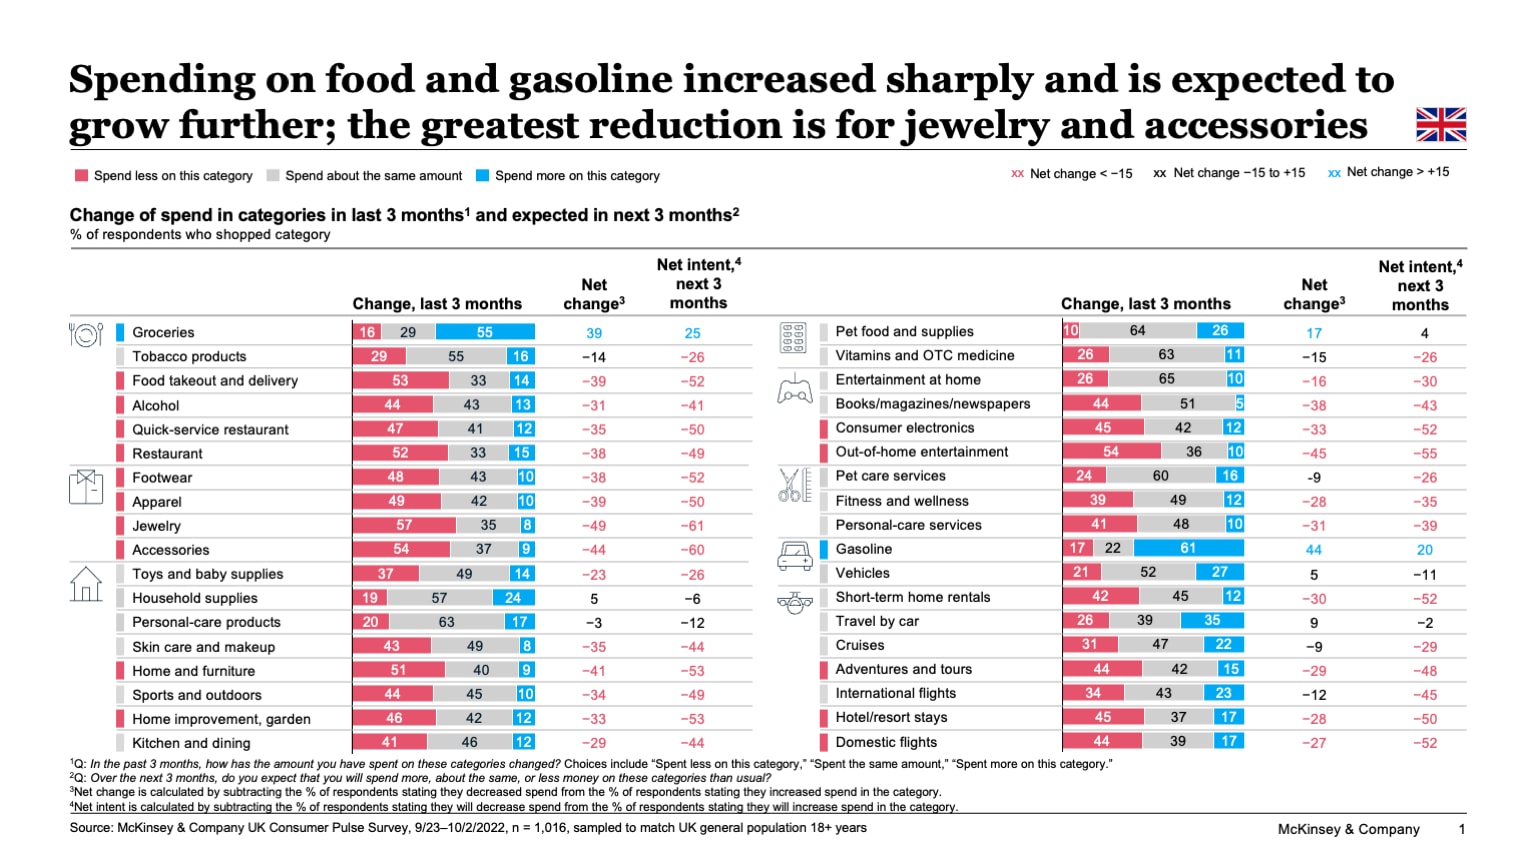 Spending on food and gasoline increased sharply and is expected to grow further; the greatest reduction is for jewelry and accessories